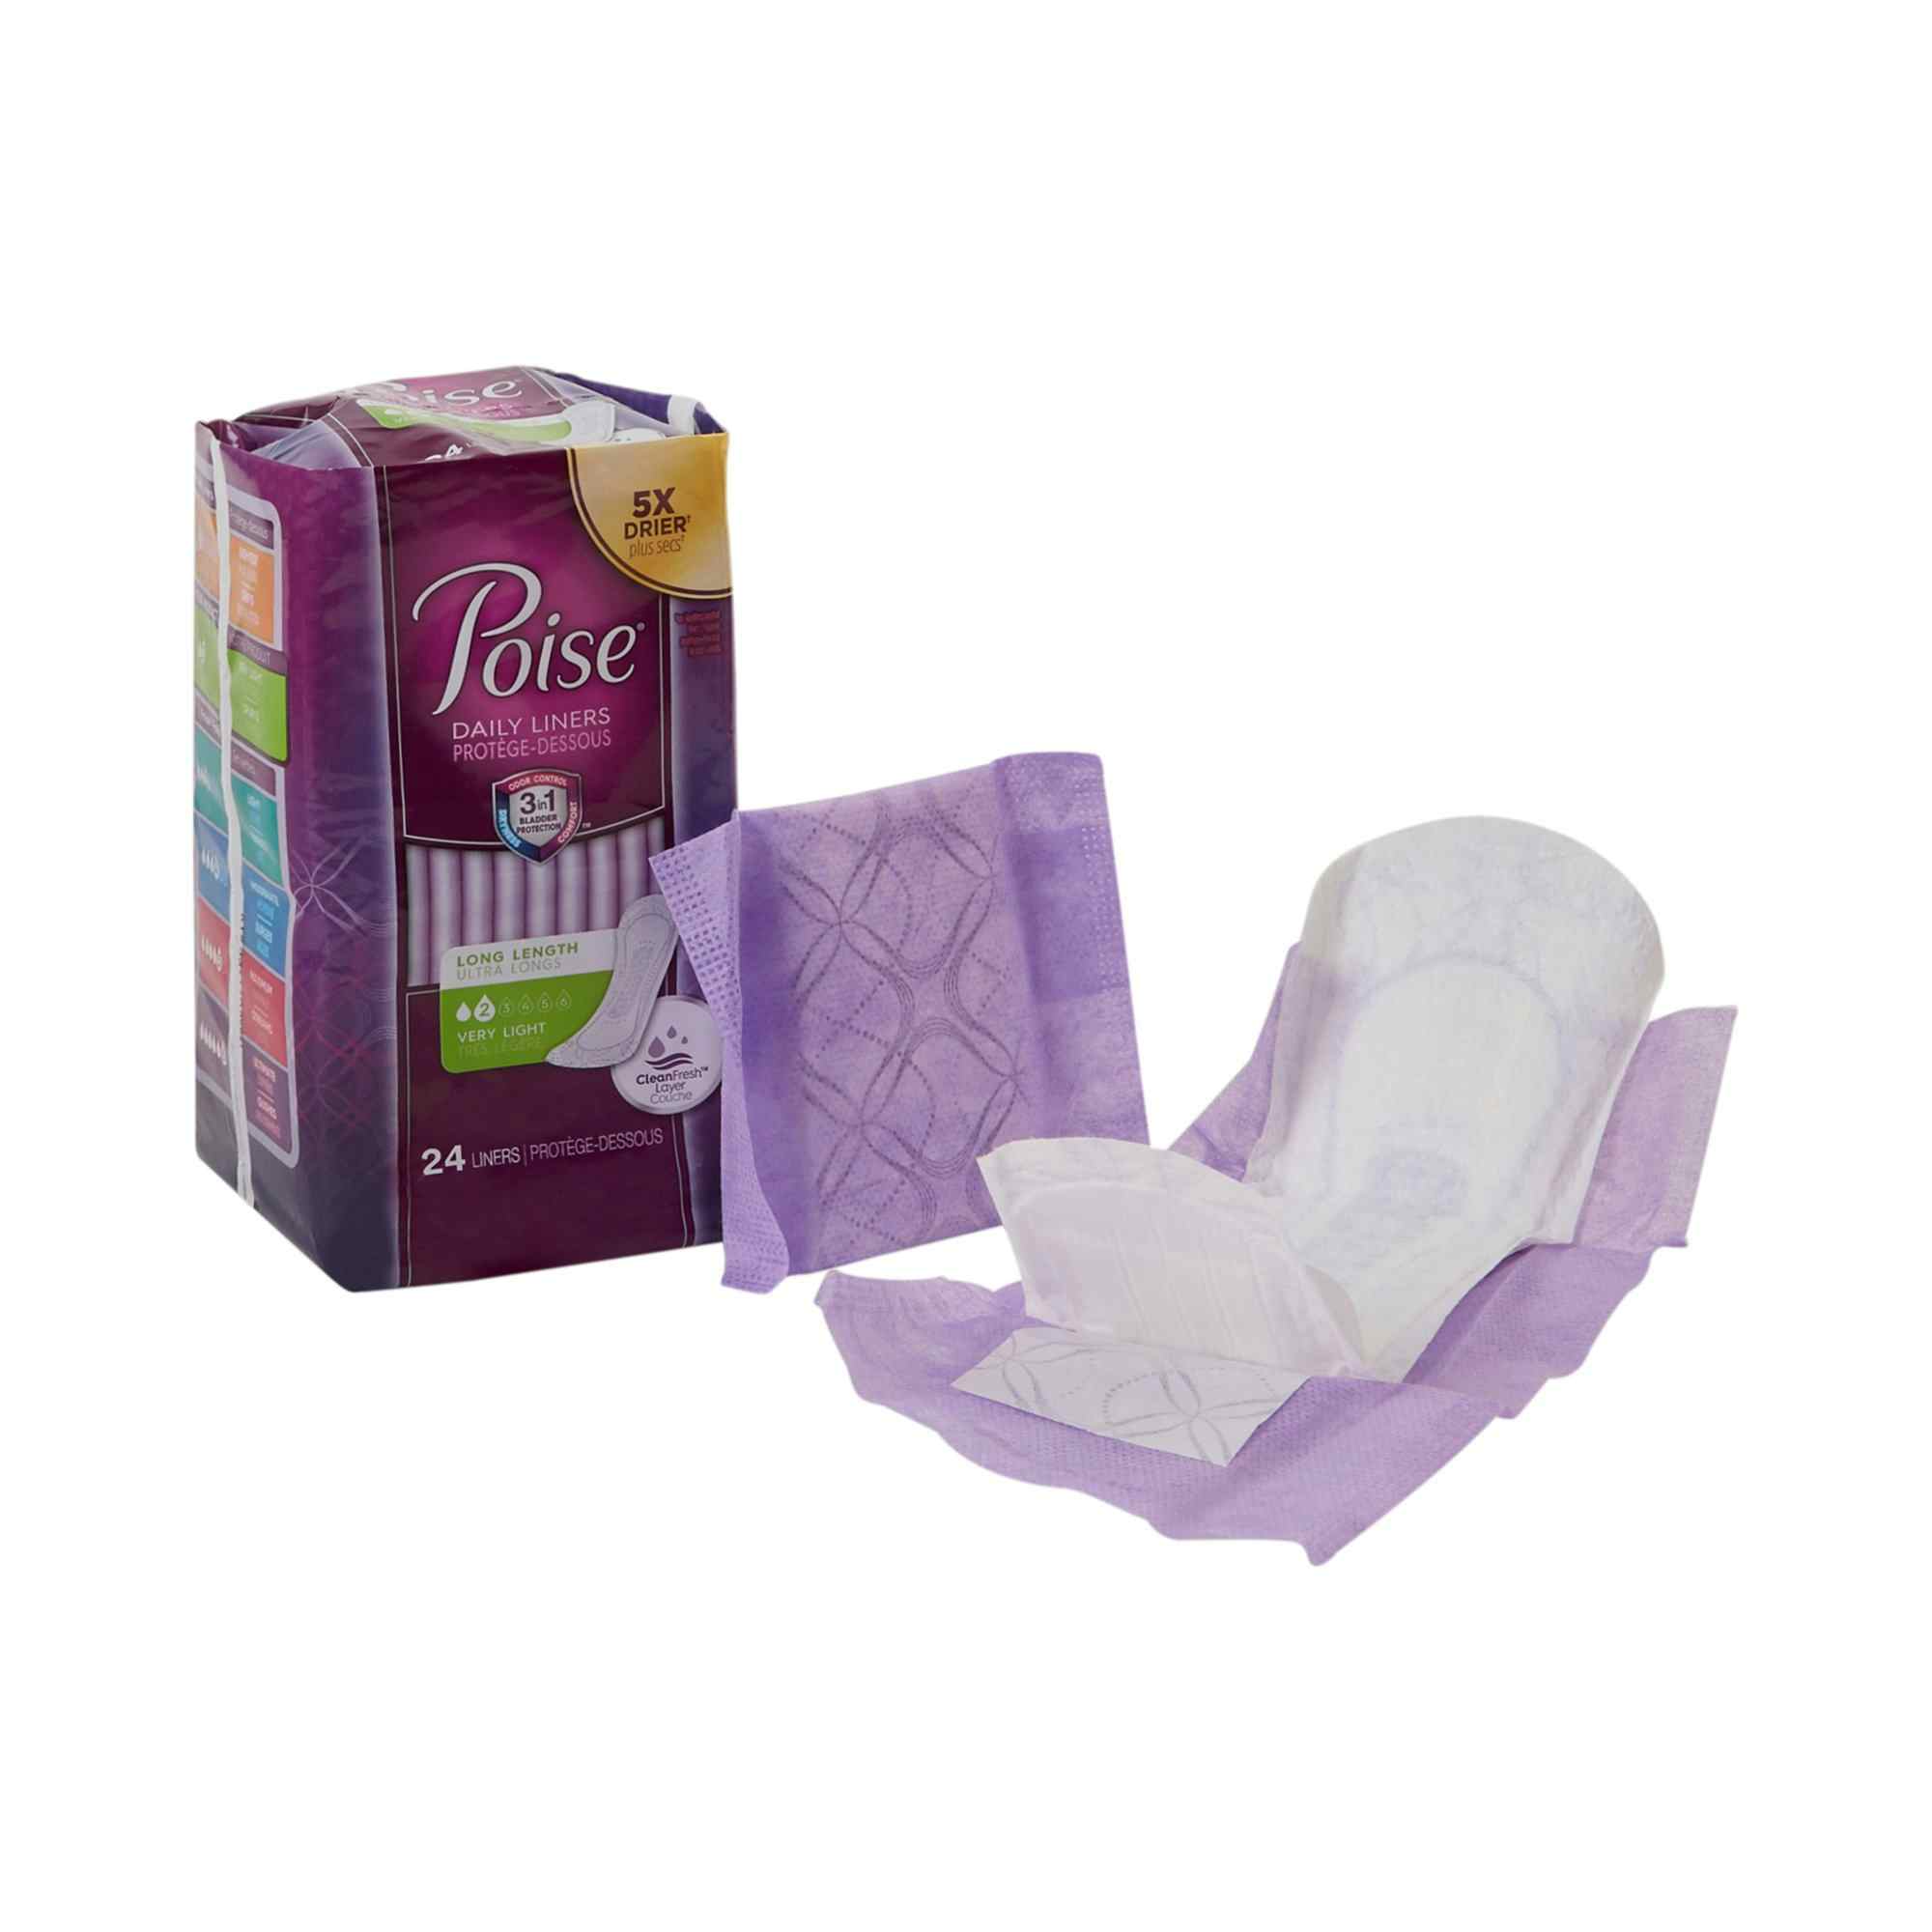 Poise Daily Liners, Very Light